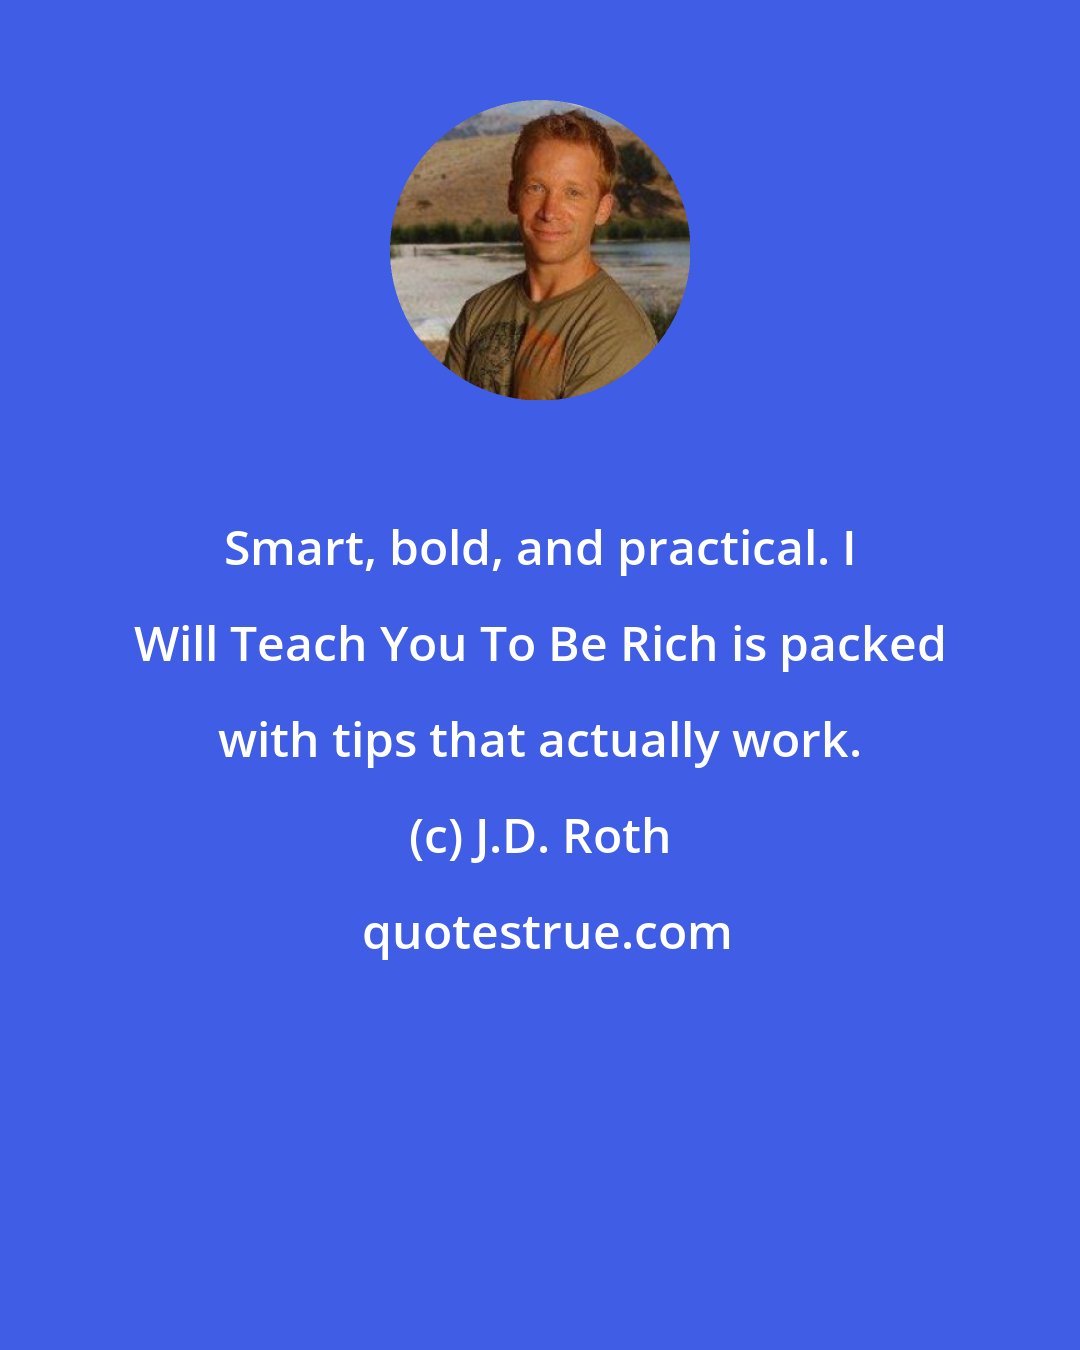 J.D. Roth: Smart, bold, and practical. I Will Teach You To Be Rich is packed with tips that actually work.